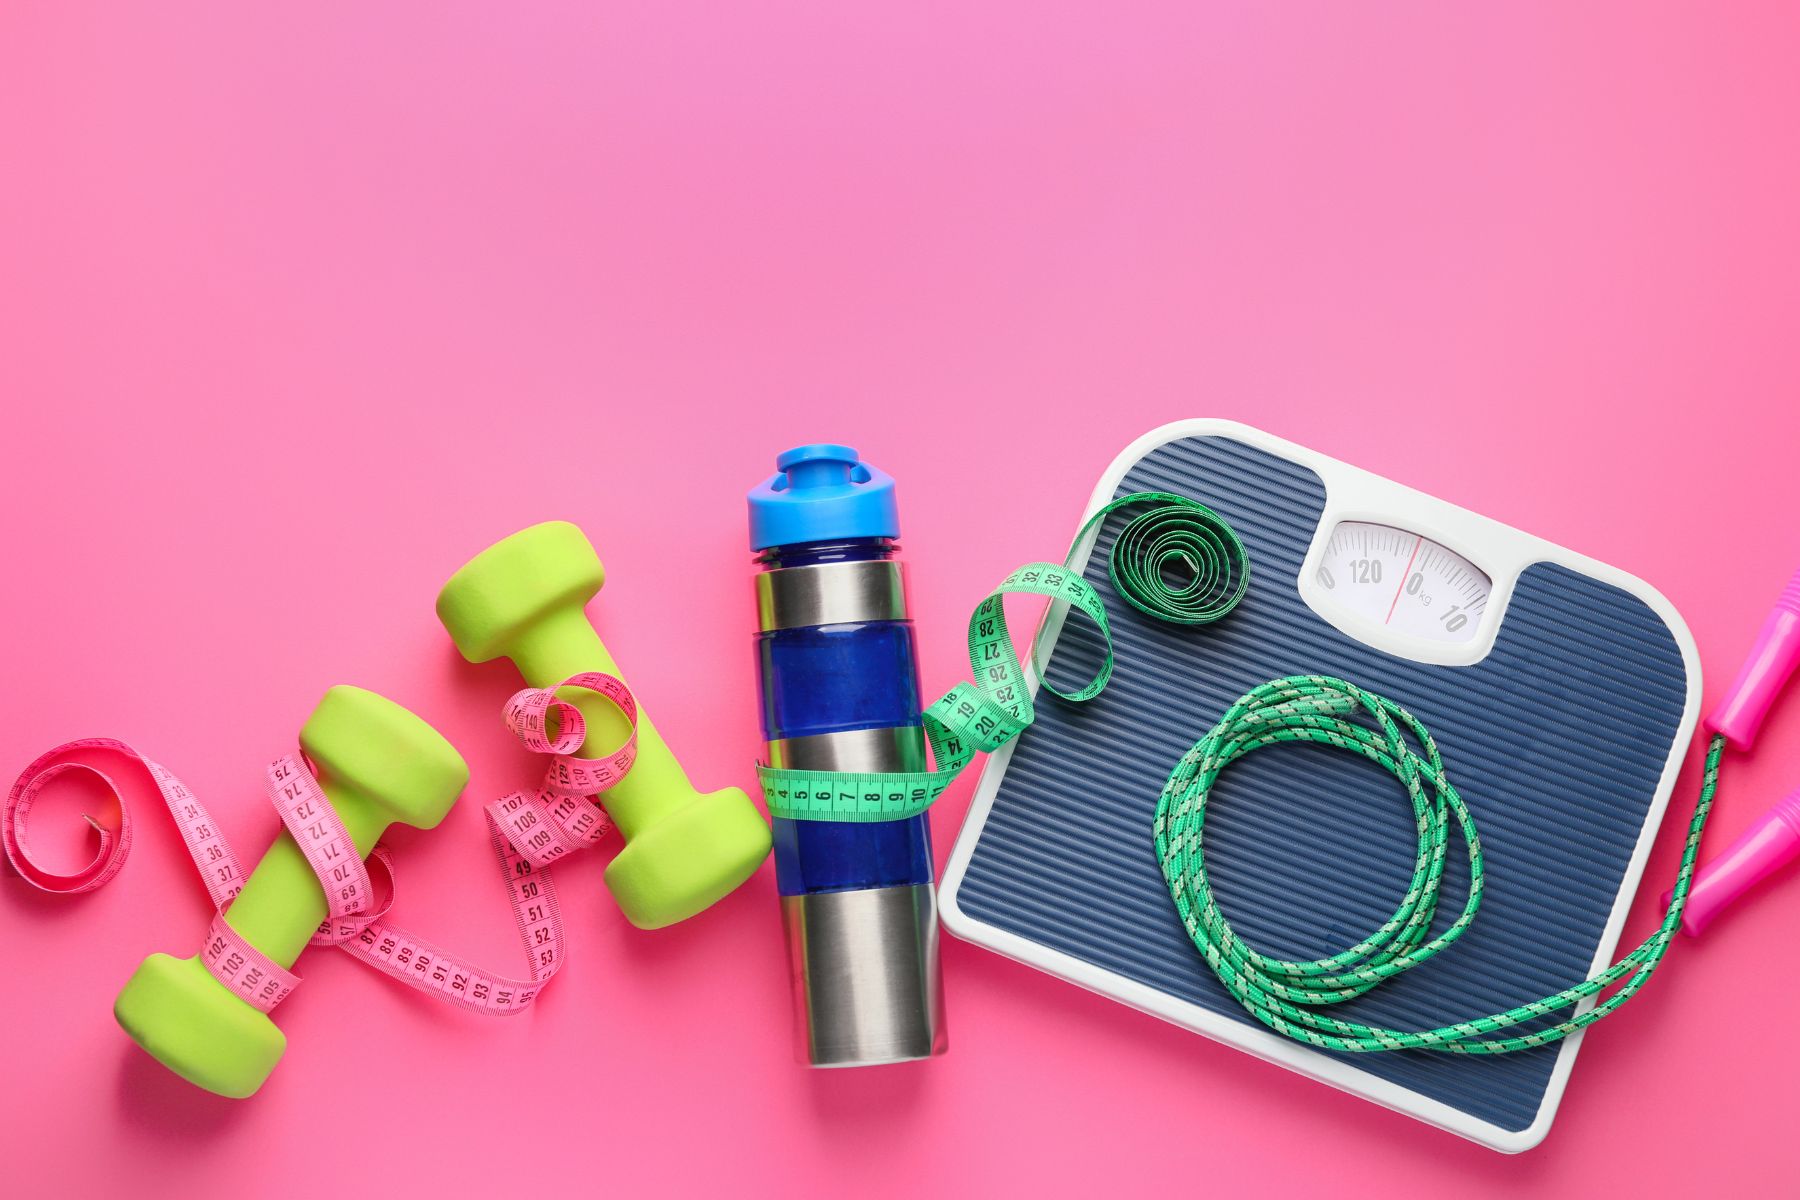 yellow dumbbells, blue water bottle, blue scale, green jump rope, against a pink background